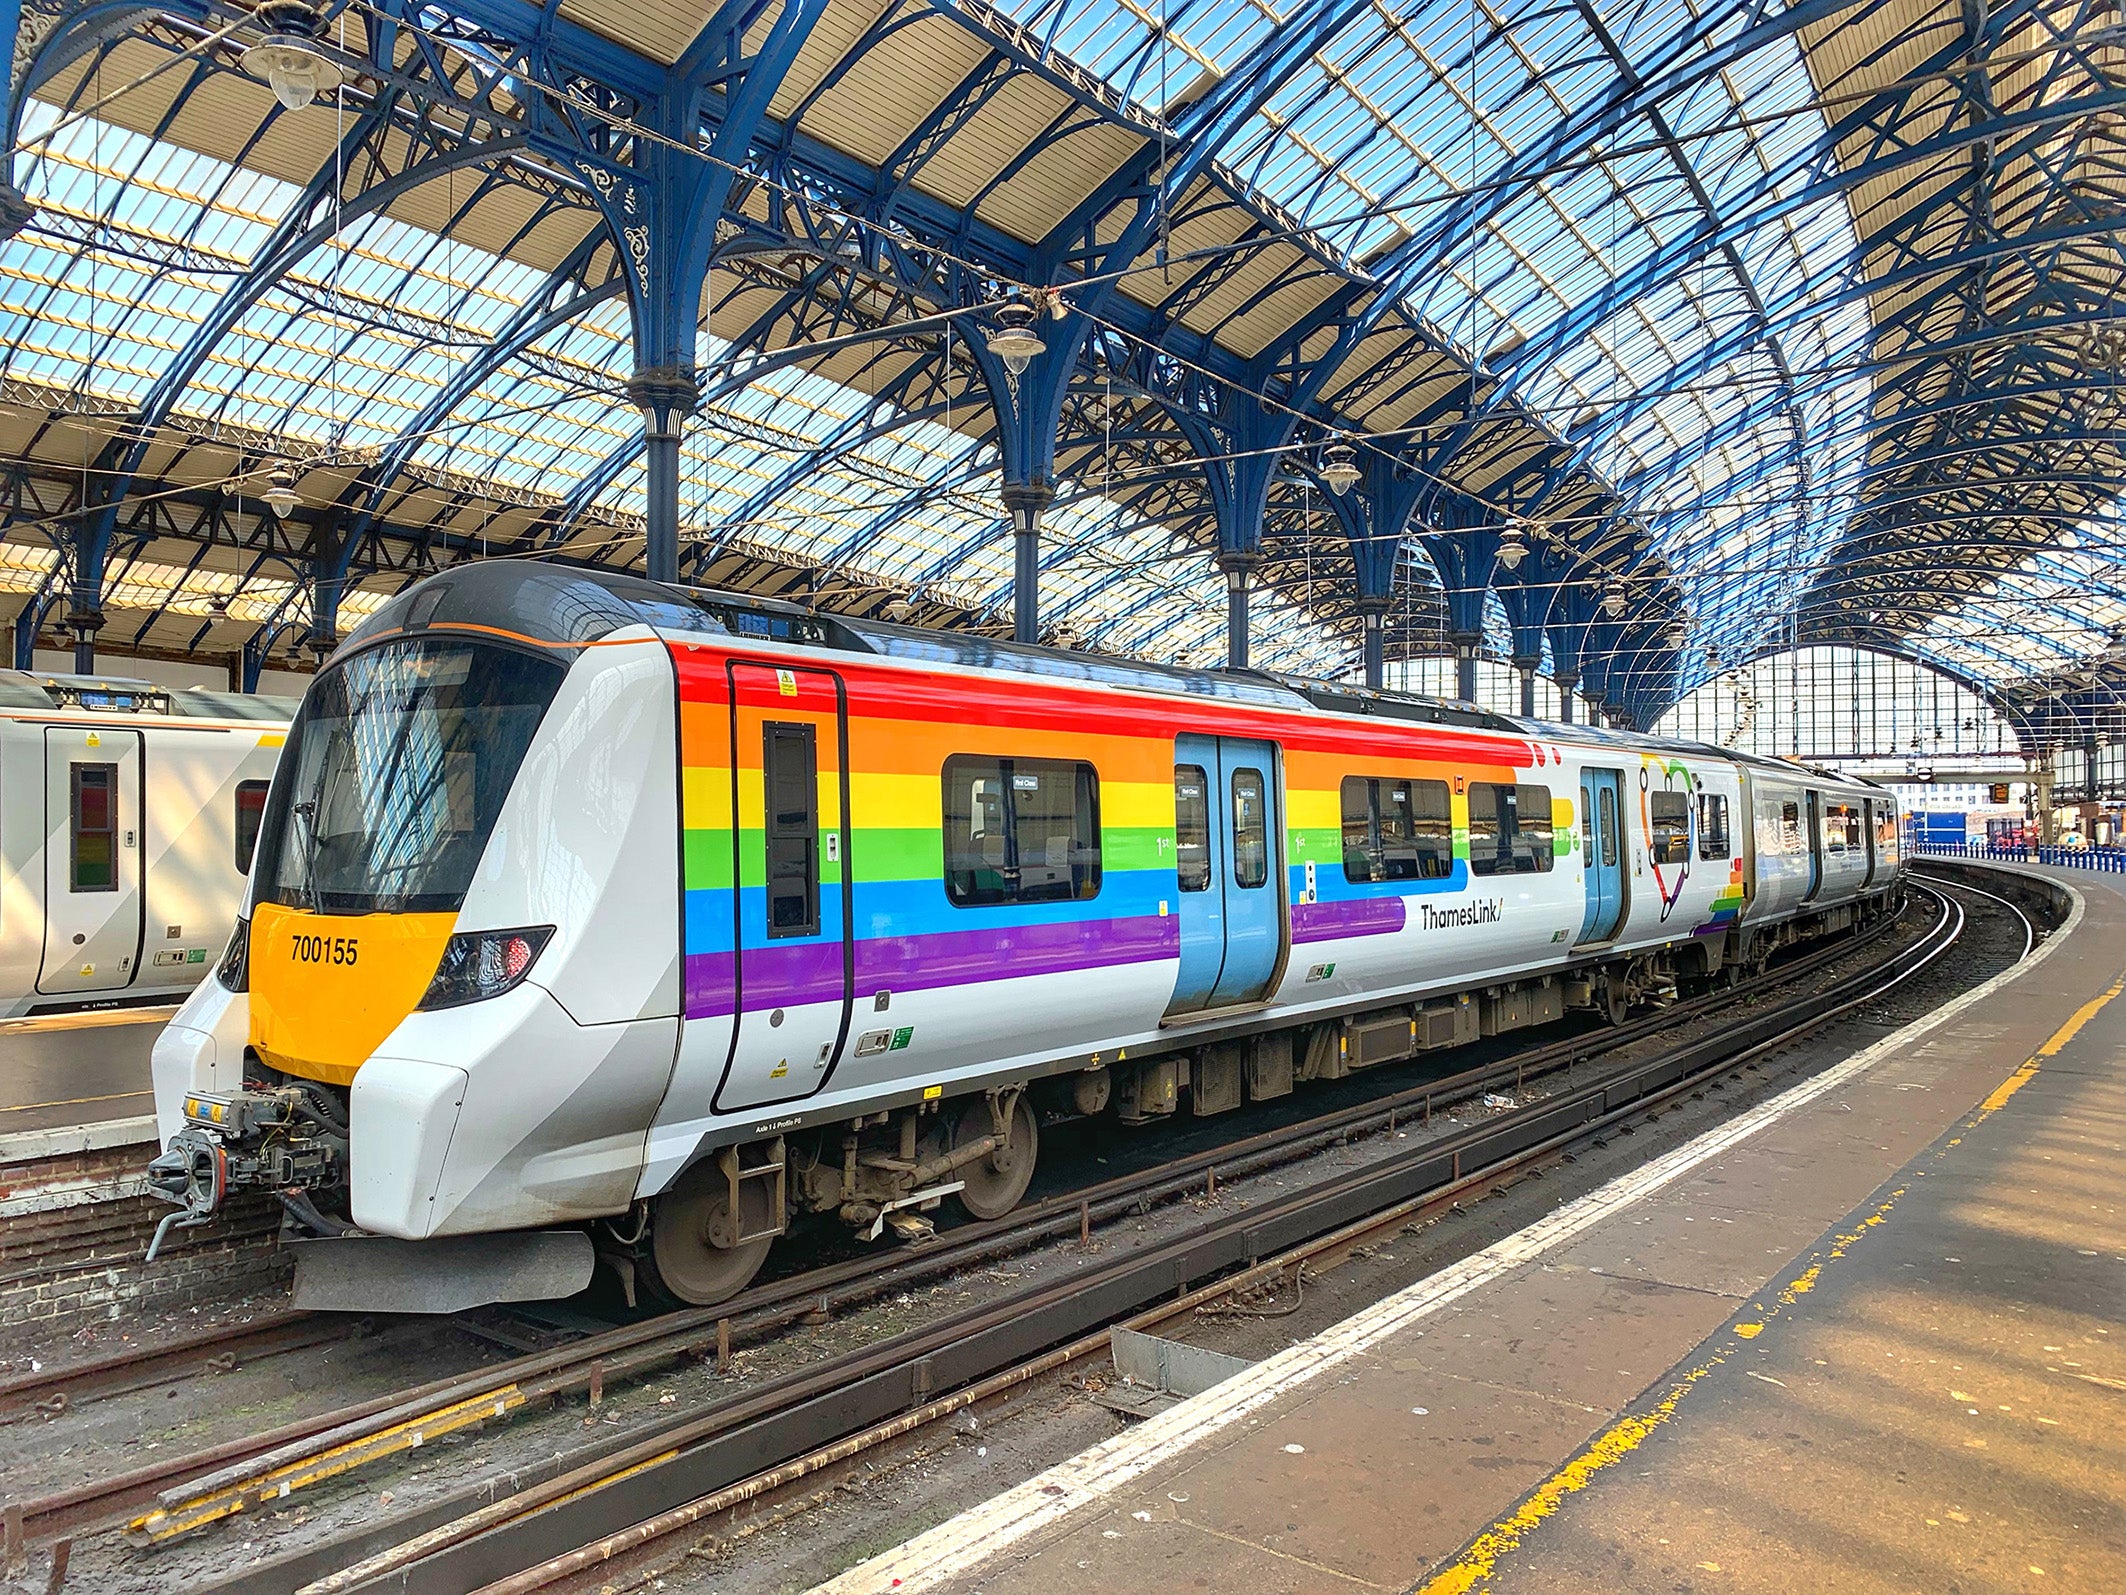 The GTR Pride train has been unveiled